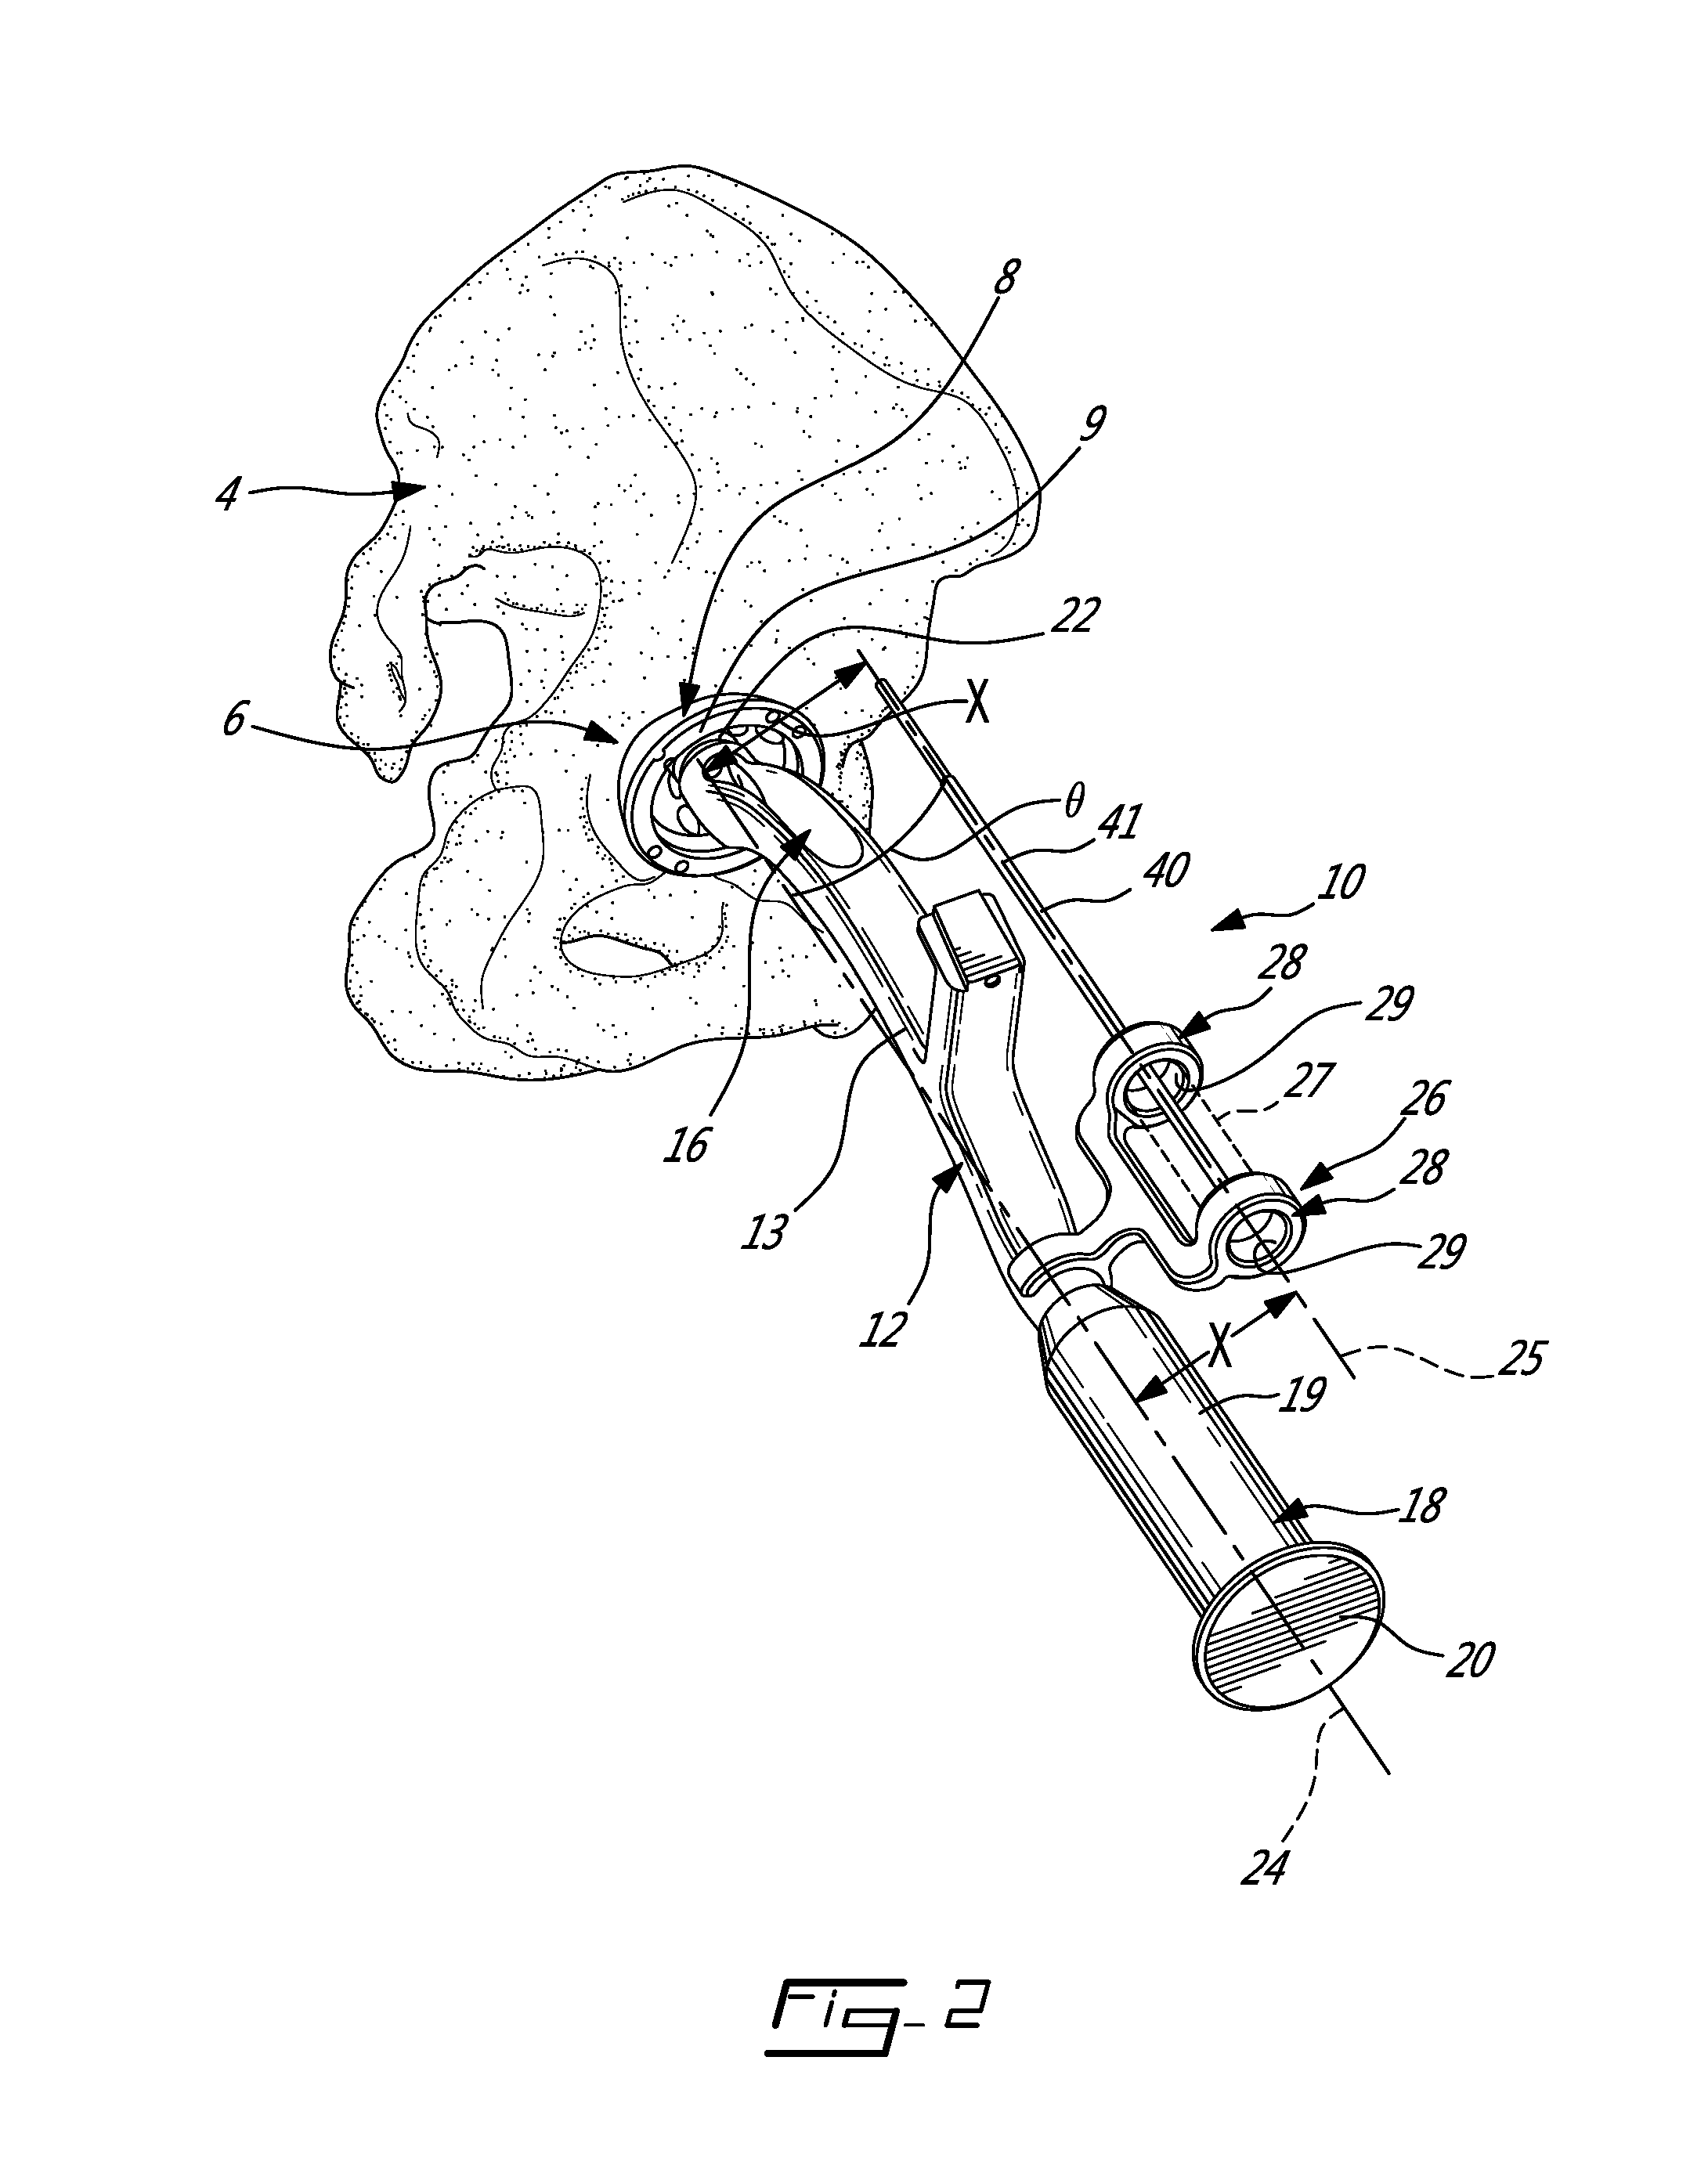 Mechanically guided impactor for hip arthroplasty